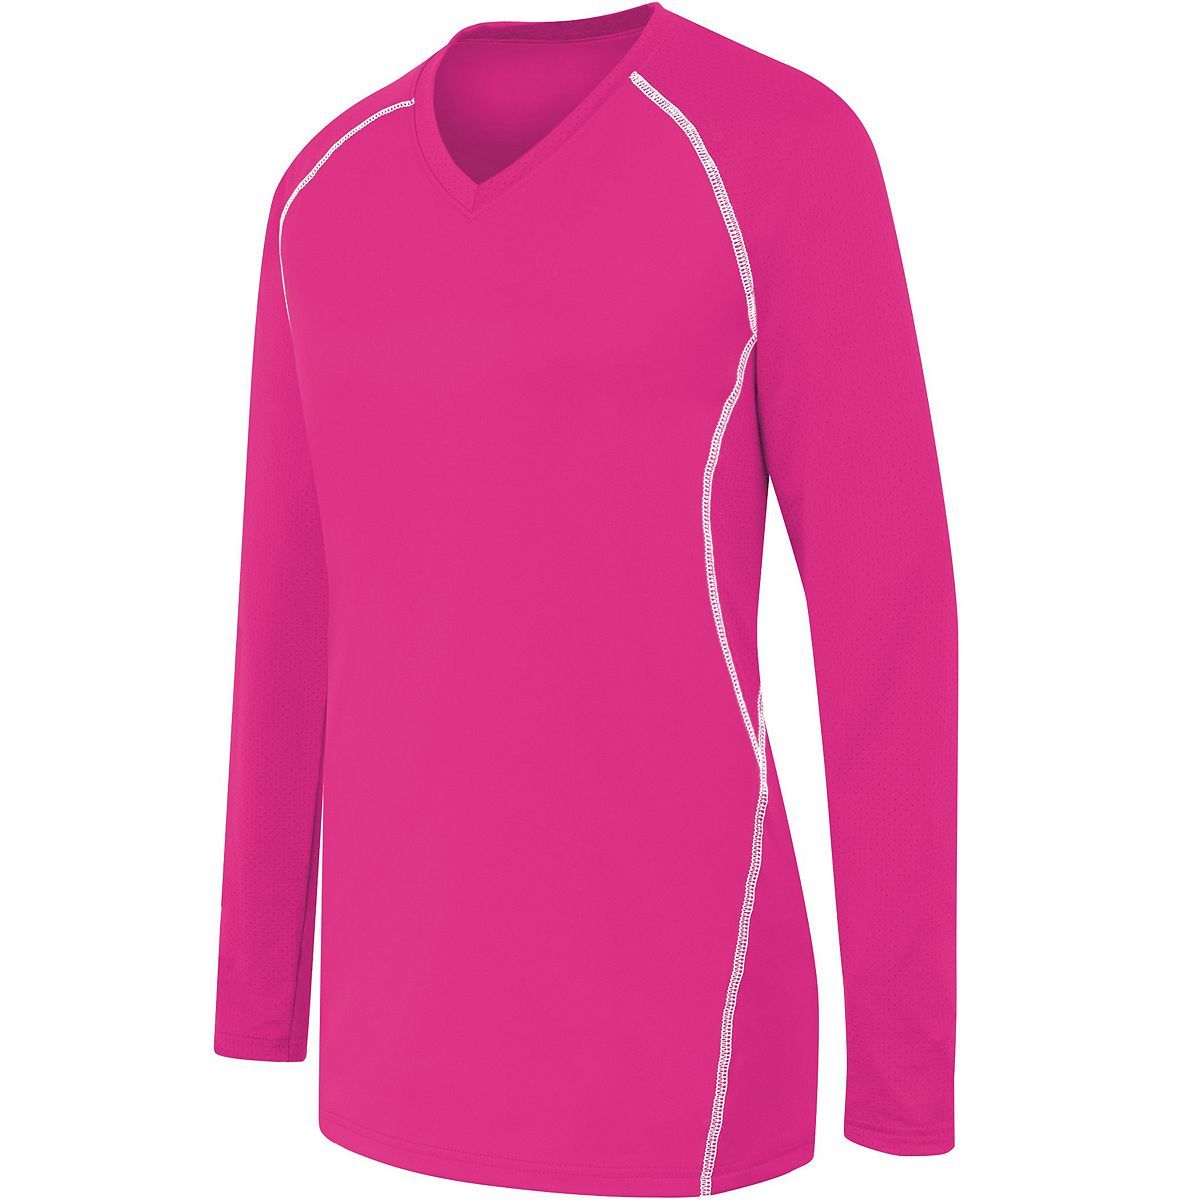 High 5 Ladies Long Sleeve Solid Jersey in Raspberry/White  -Part of the Ladies, Ladies-Jersey, High5-Products, Volleyball, Shirts product lines at KanaleyCreations.com